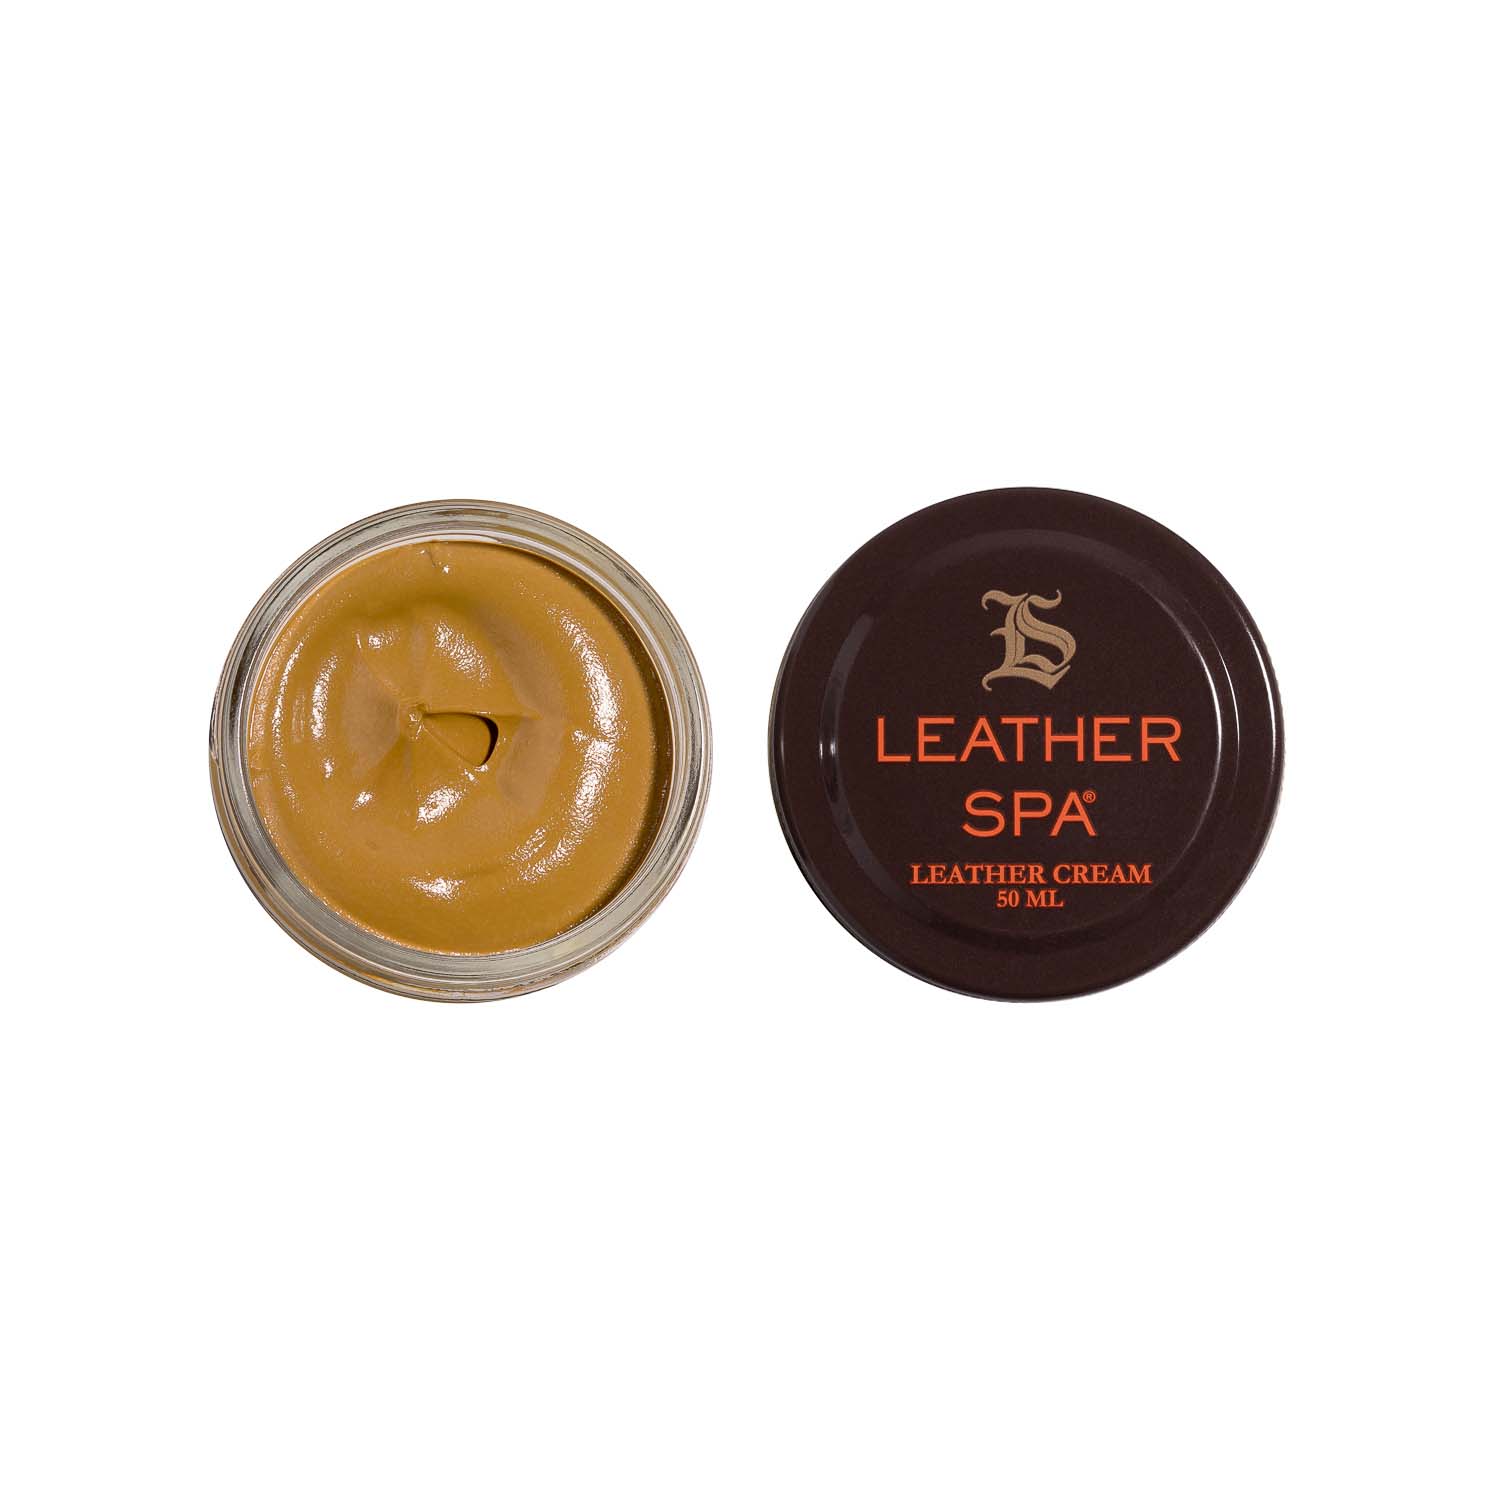 Leather and Shoe Cream | LEATHER SPA Store